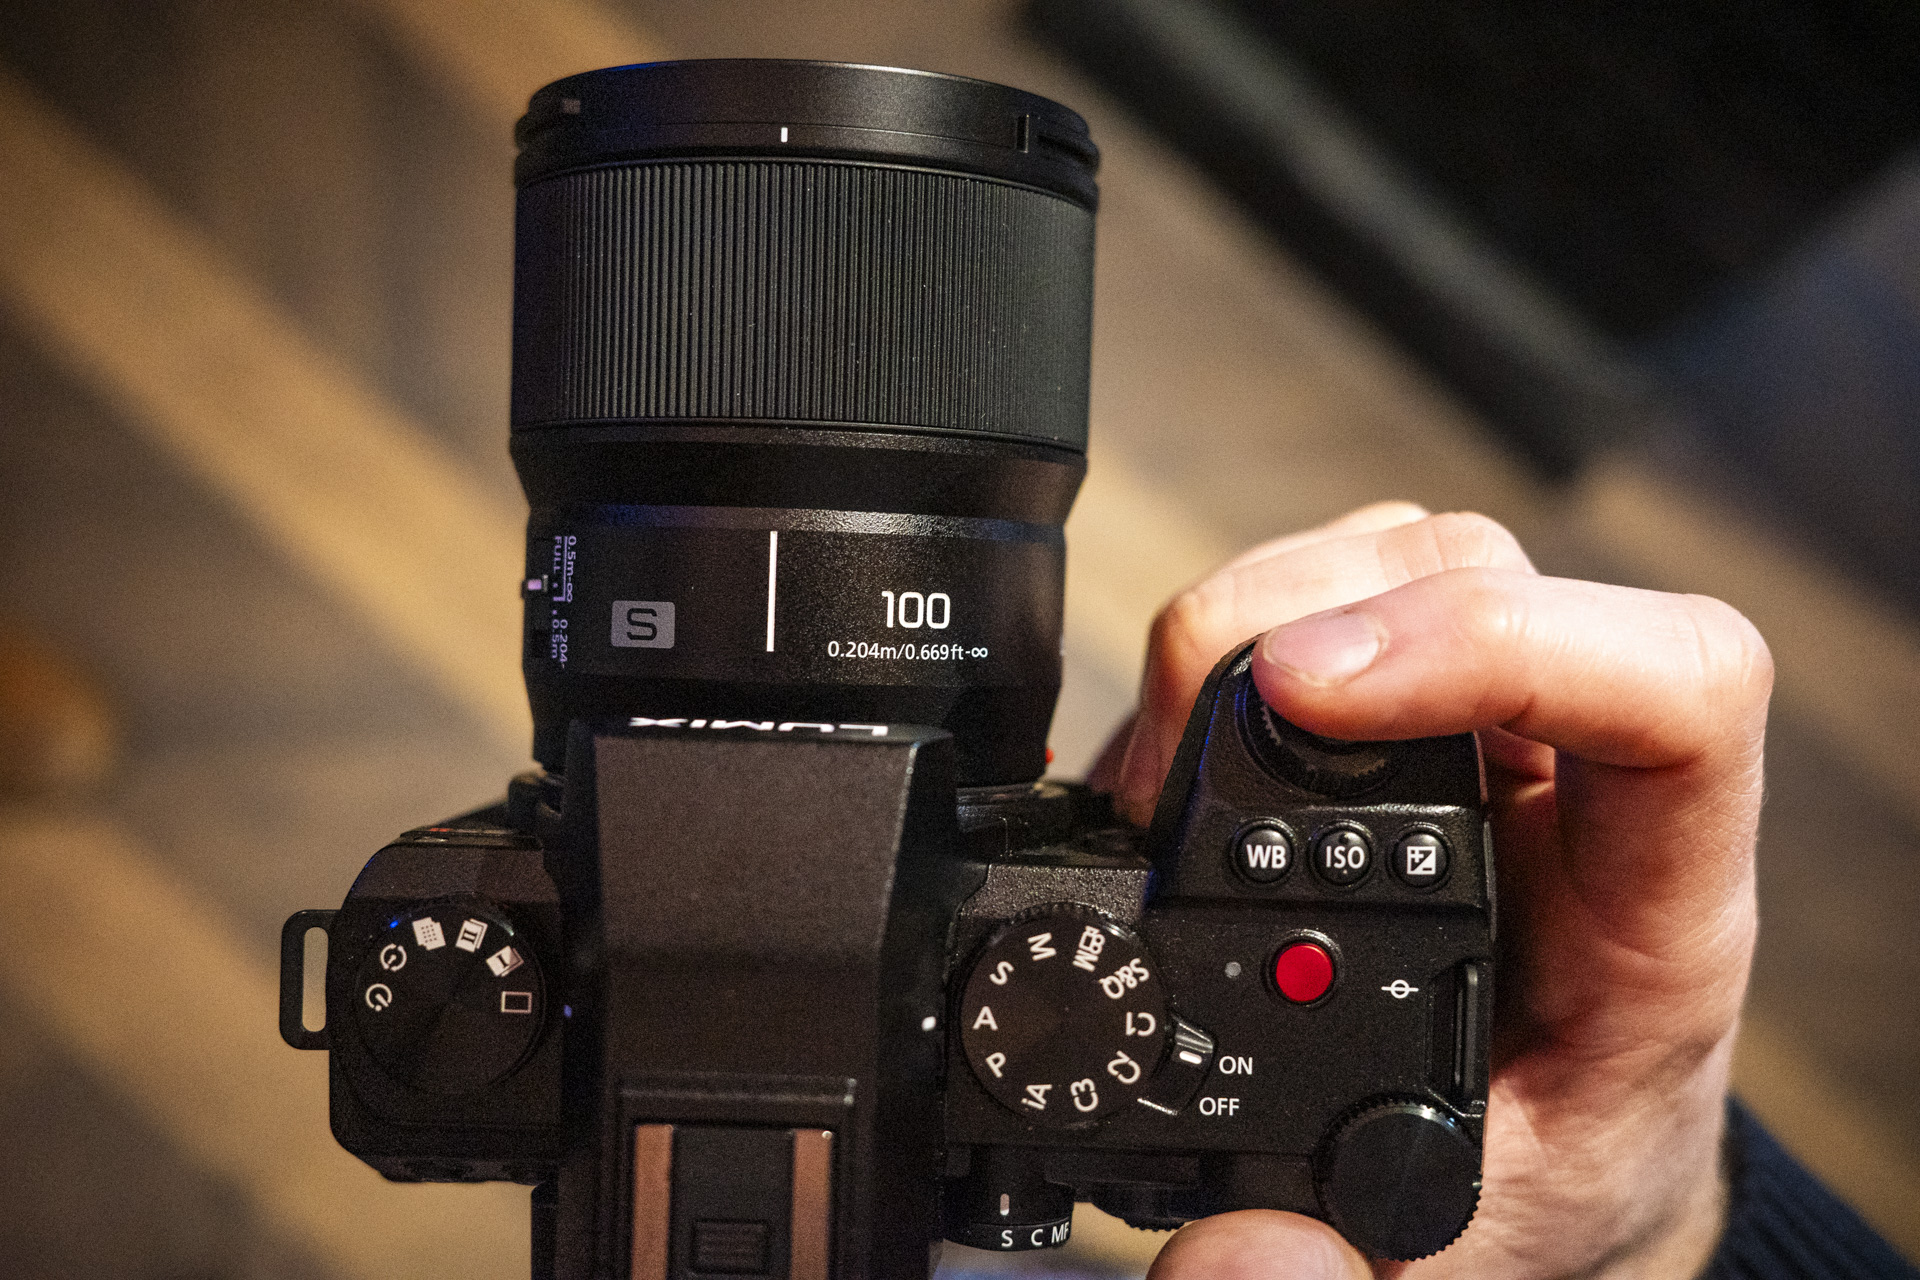 Panasonic Lumix S 100mm F2.8 Macro lens attached to a Lumix S5 II in the hand